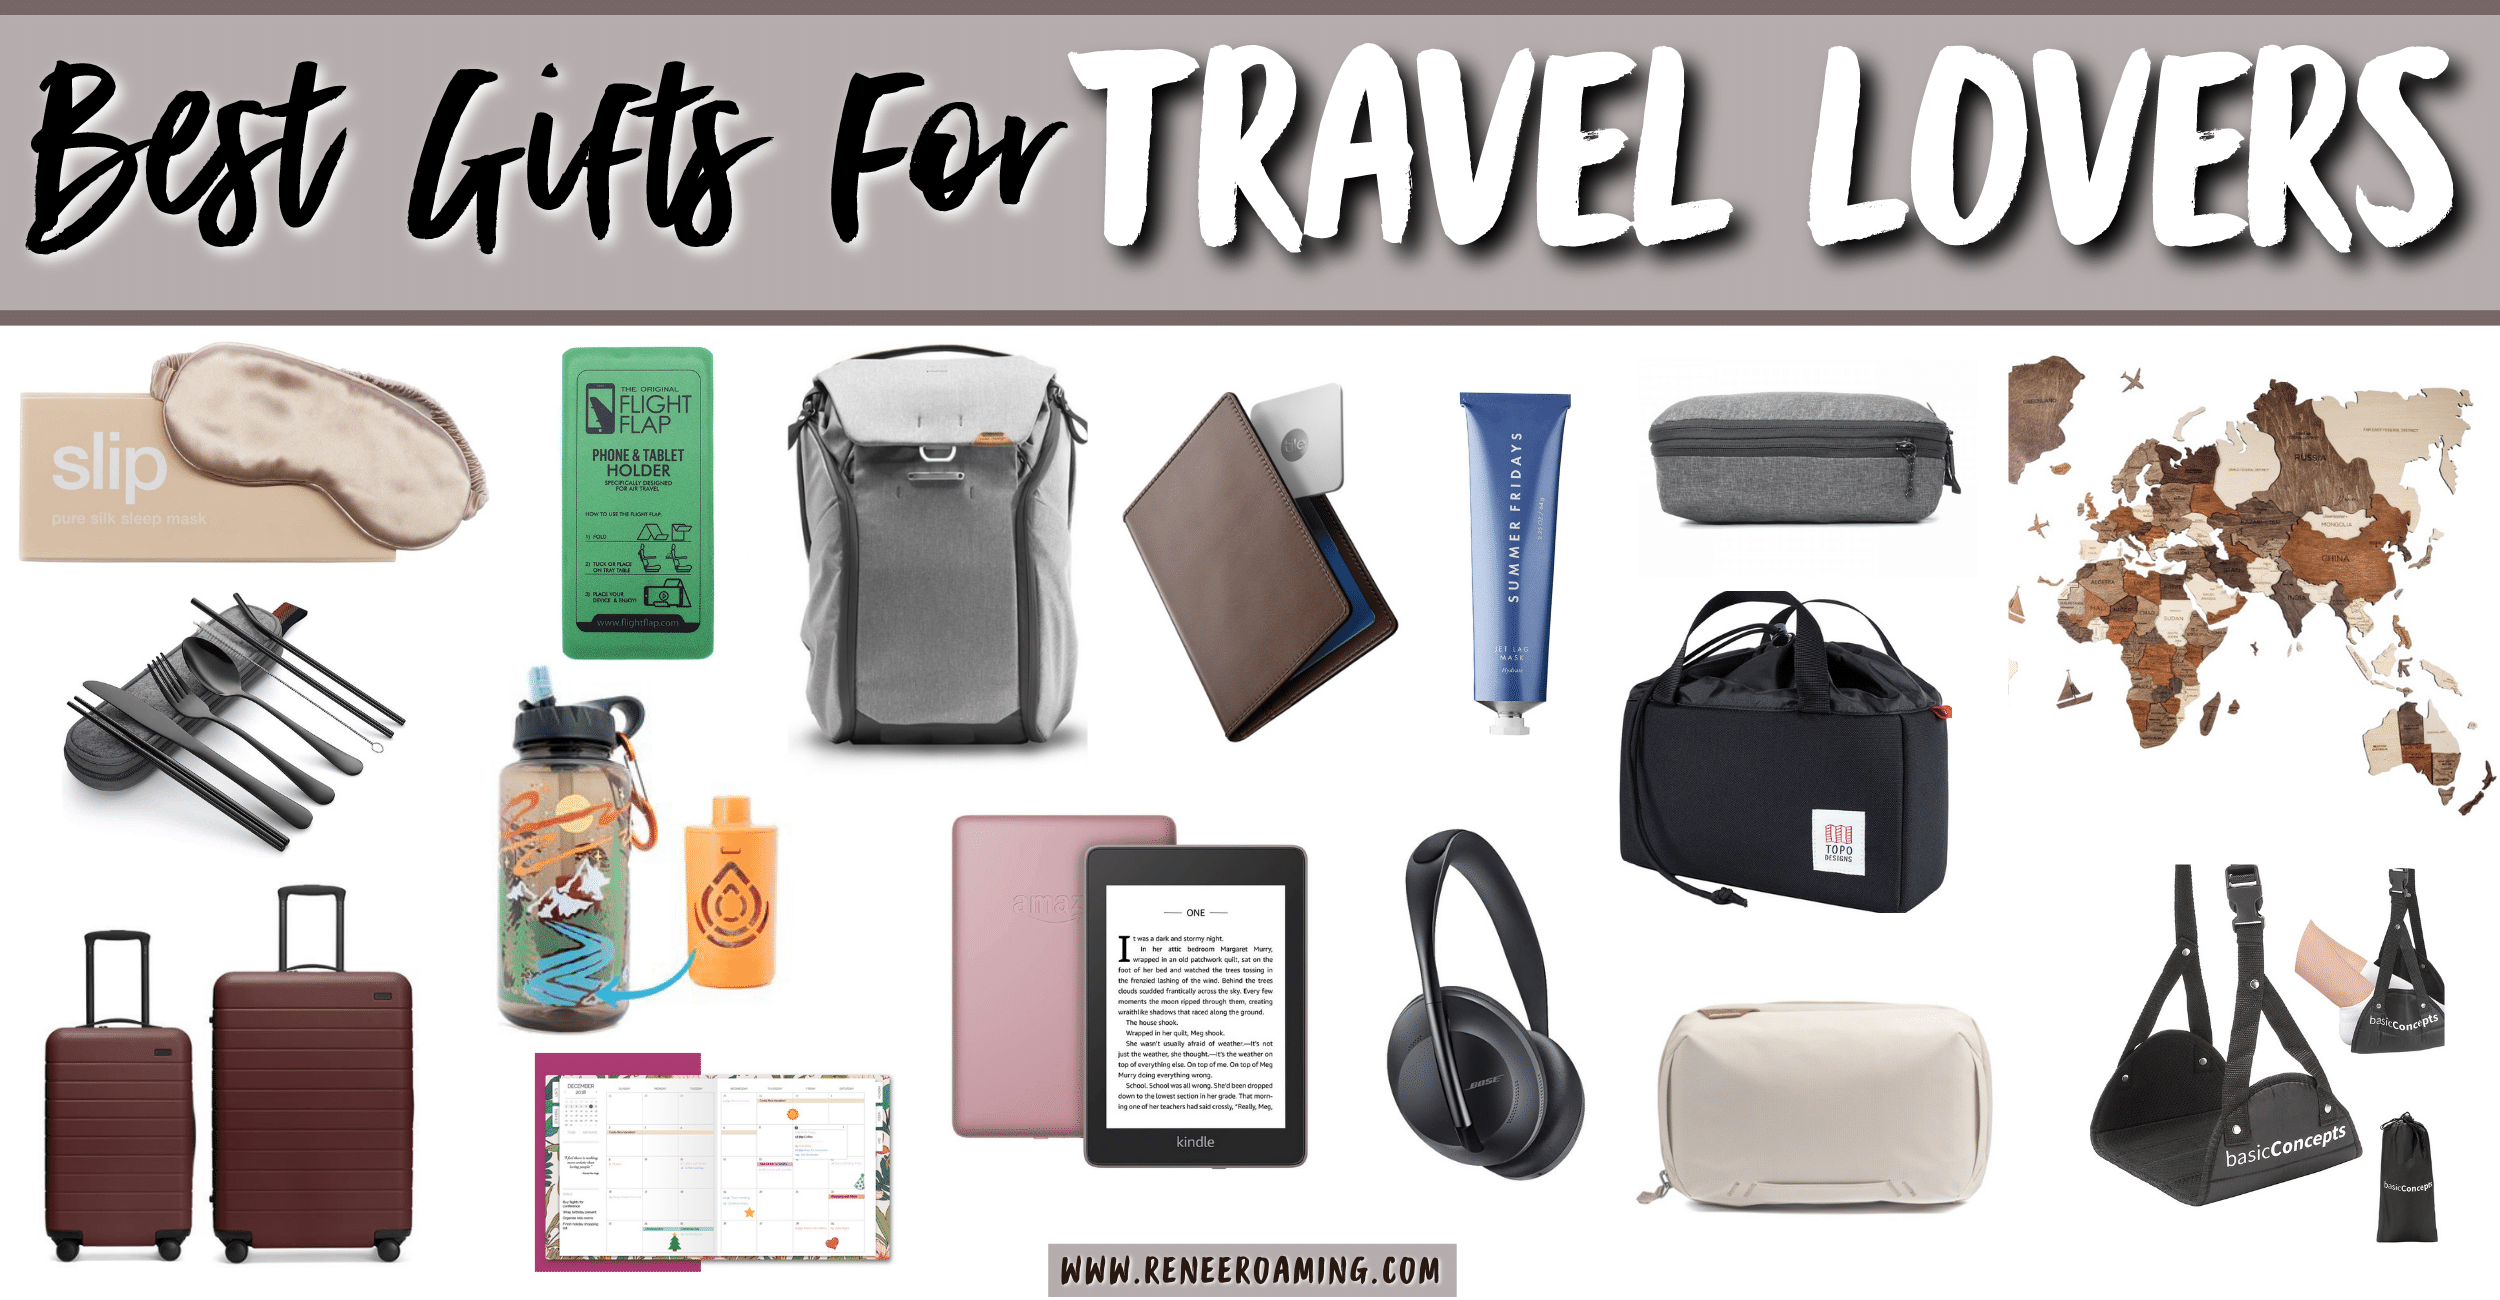 22 Best Gifts for Travel Lovers 2020